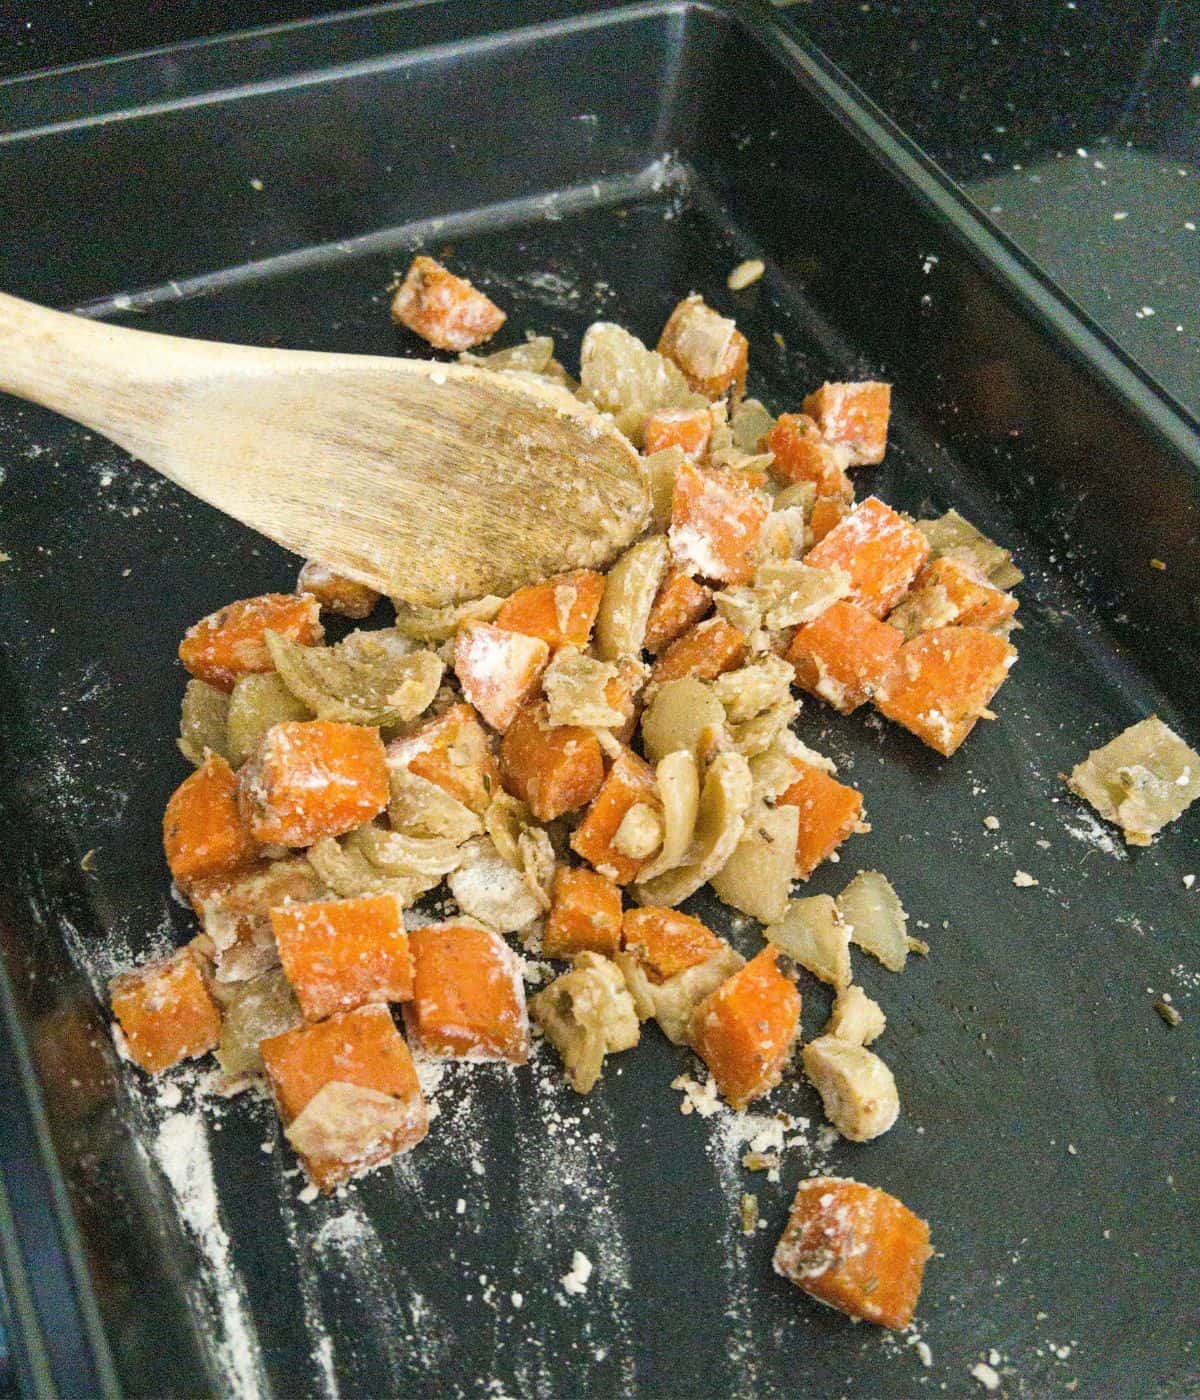 Onions and carrots in a pan with flour being stirred.